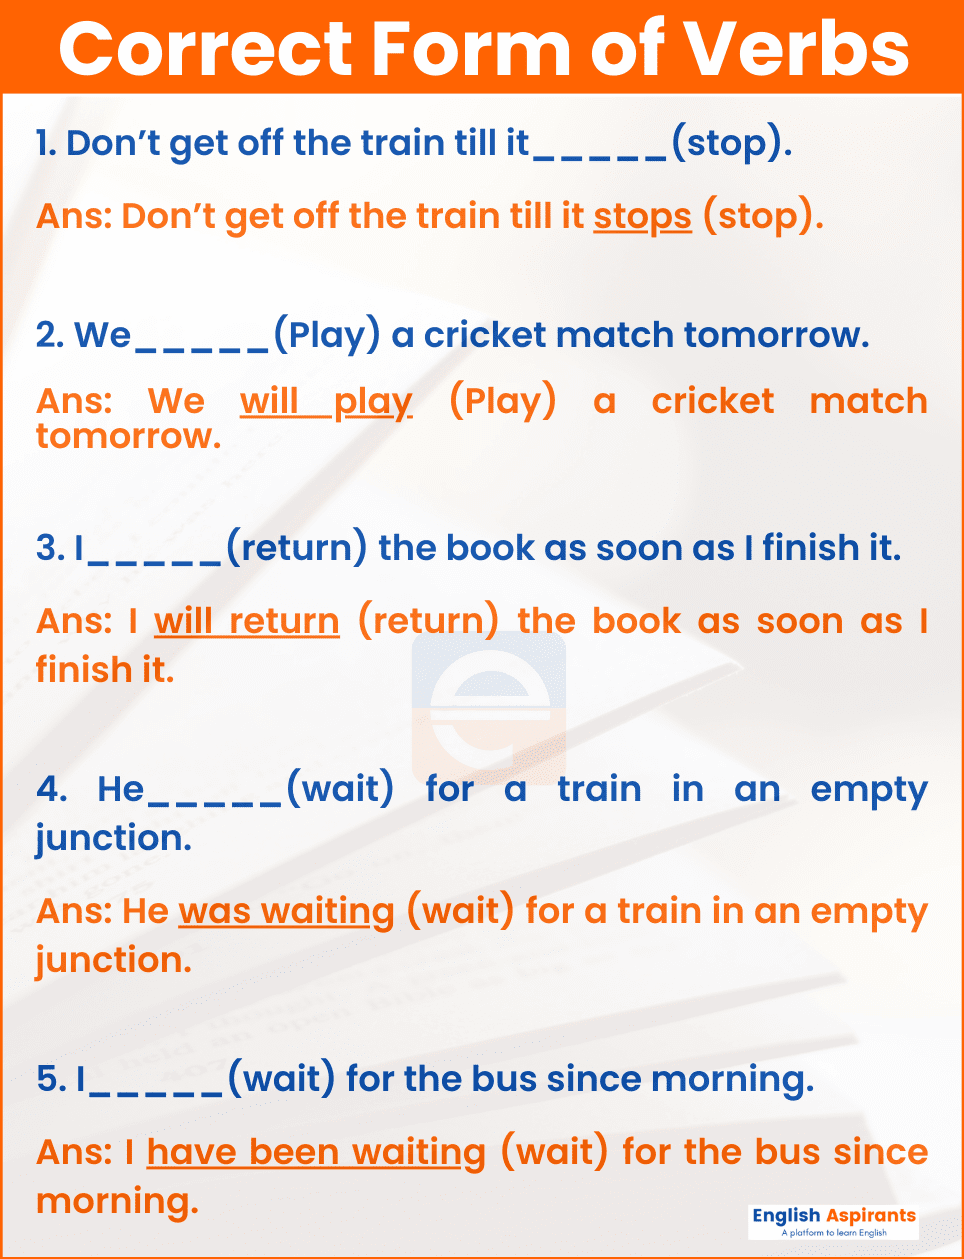 Fill in the Blanks With Correct Form of Verb